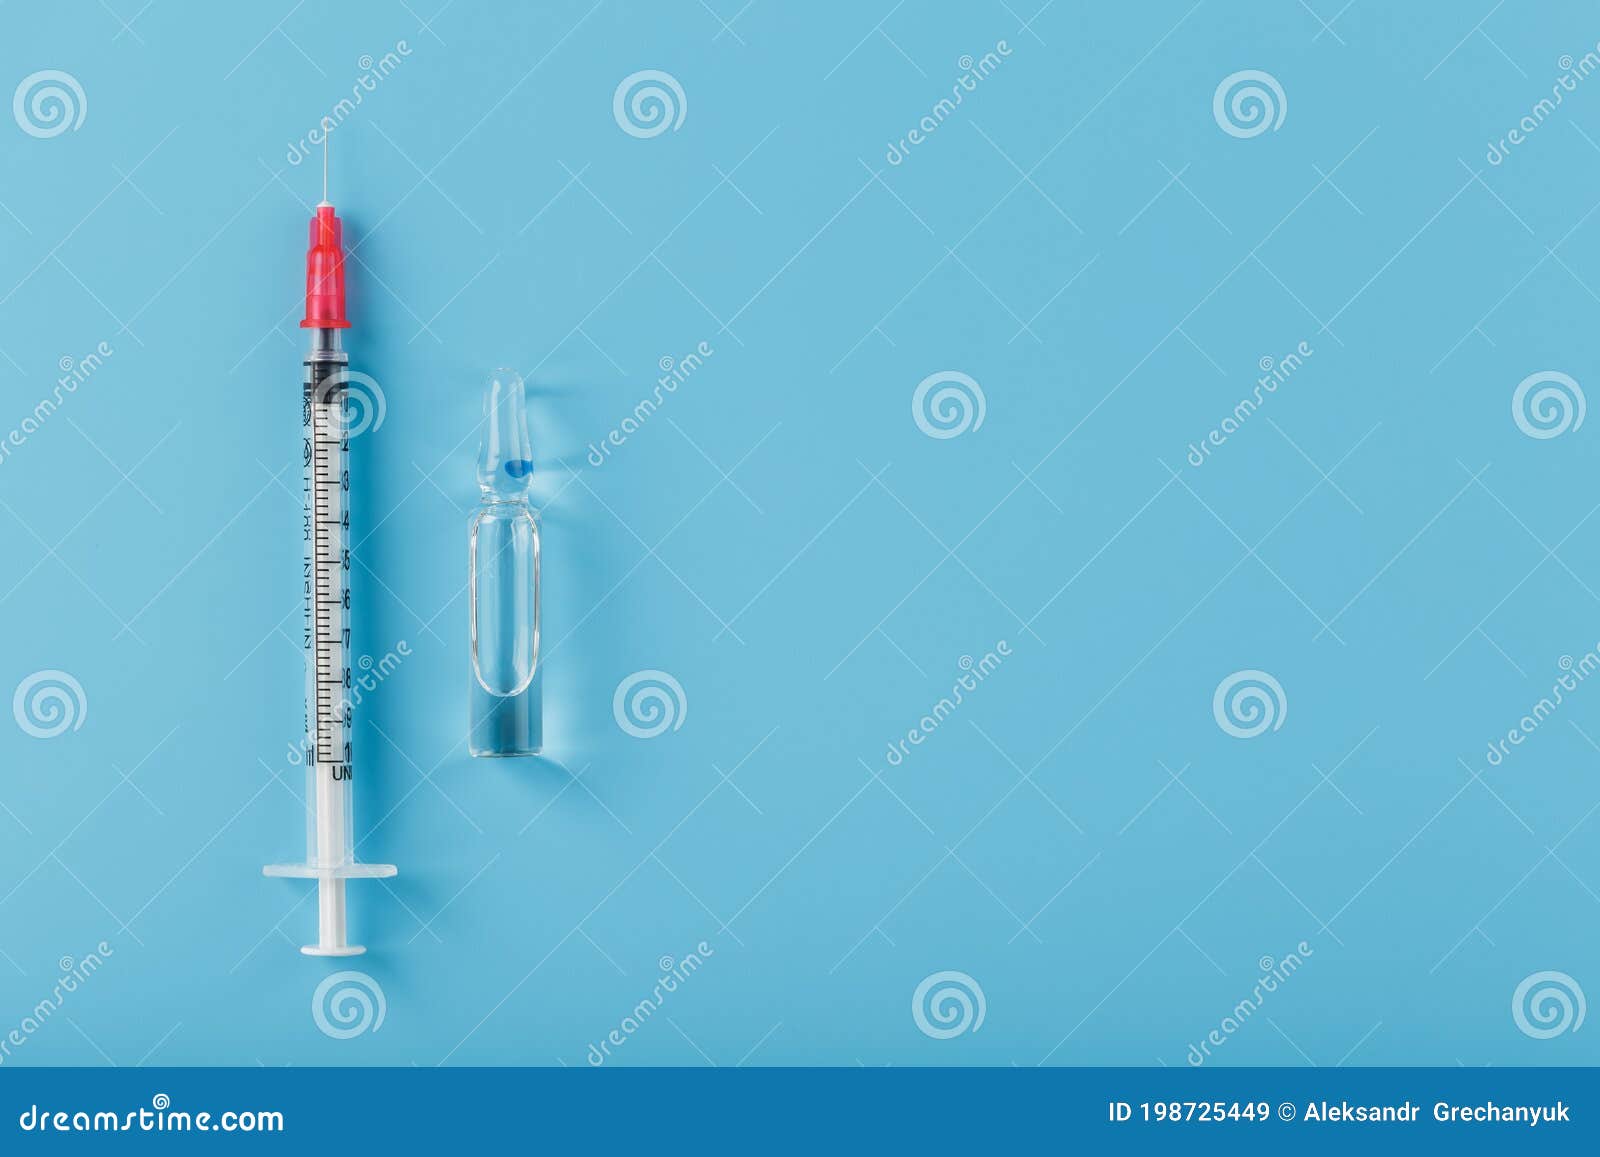 ampoule with medicine and syringe on a blue background, top view.